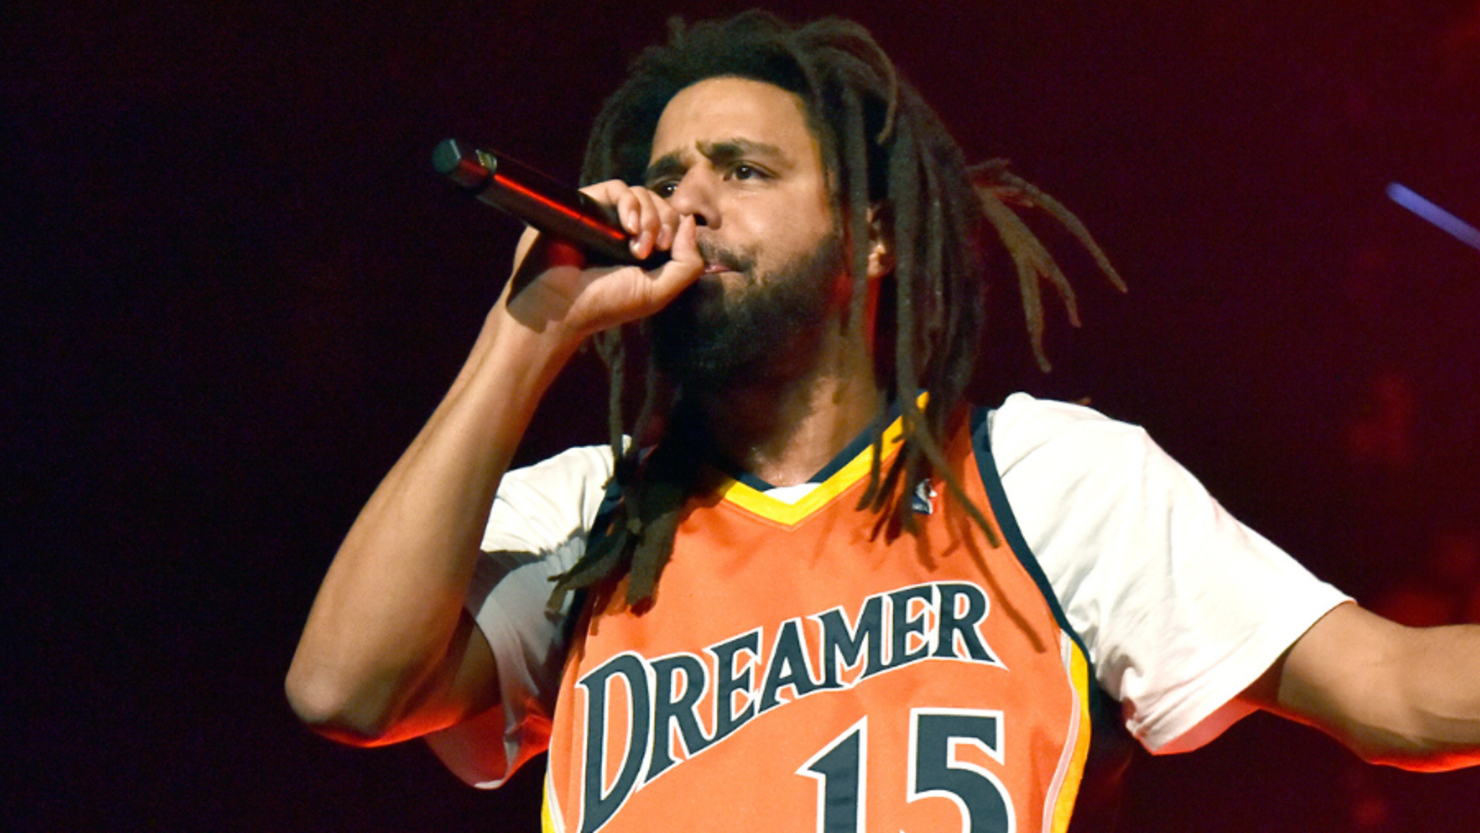 Could rapper J. Cole be joining the NBA? – X102.3